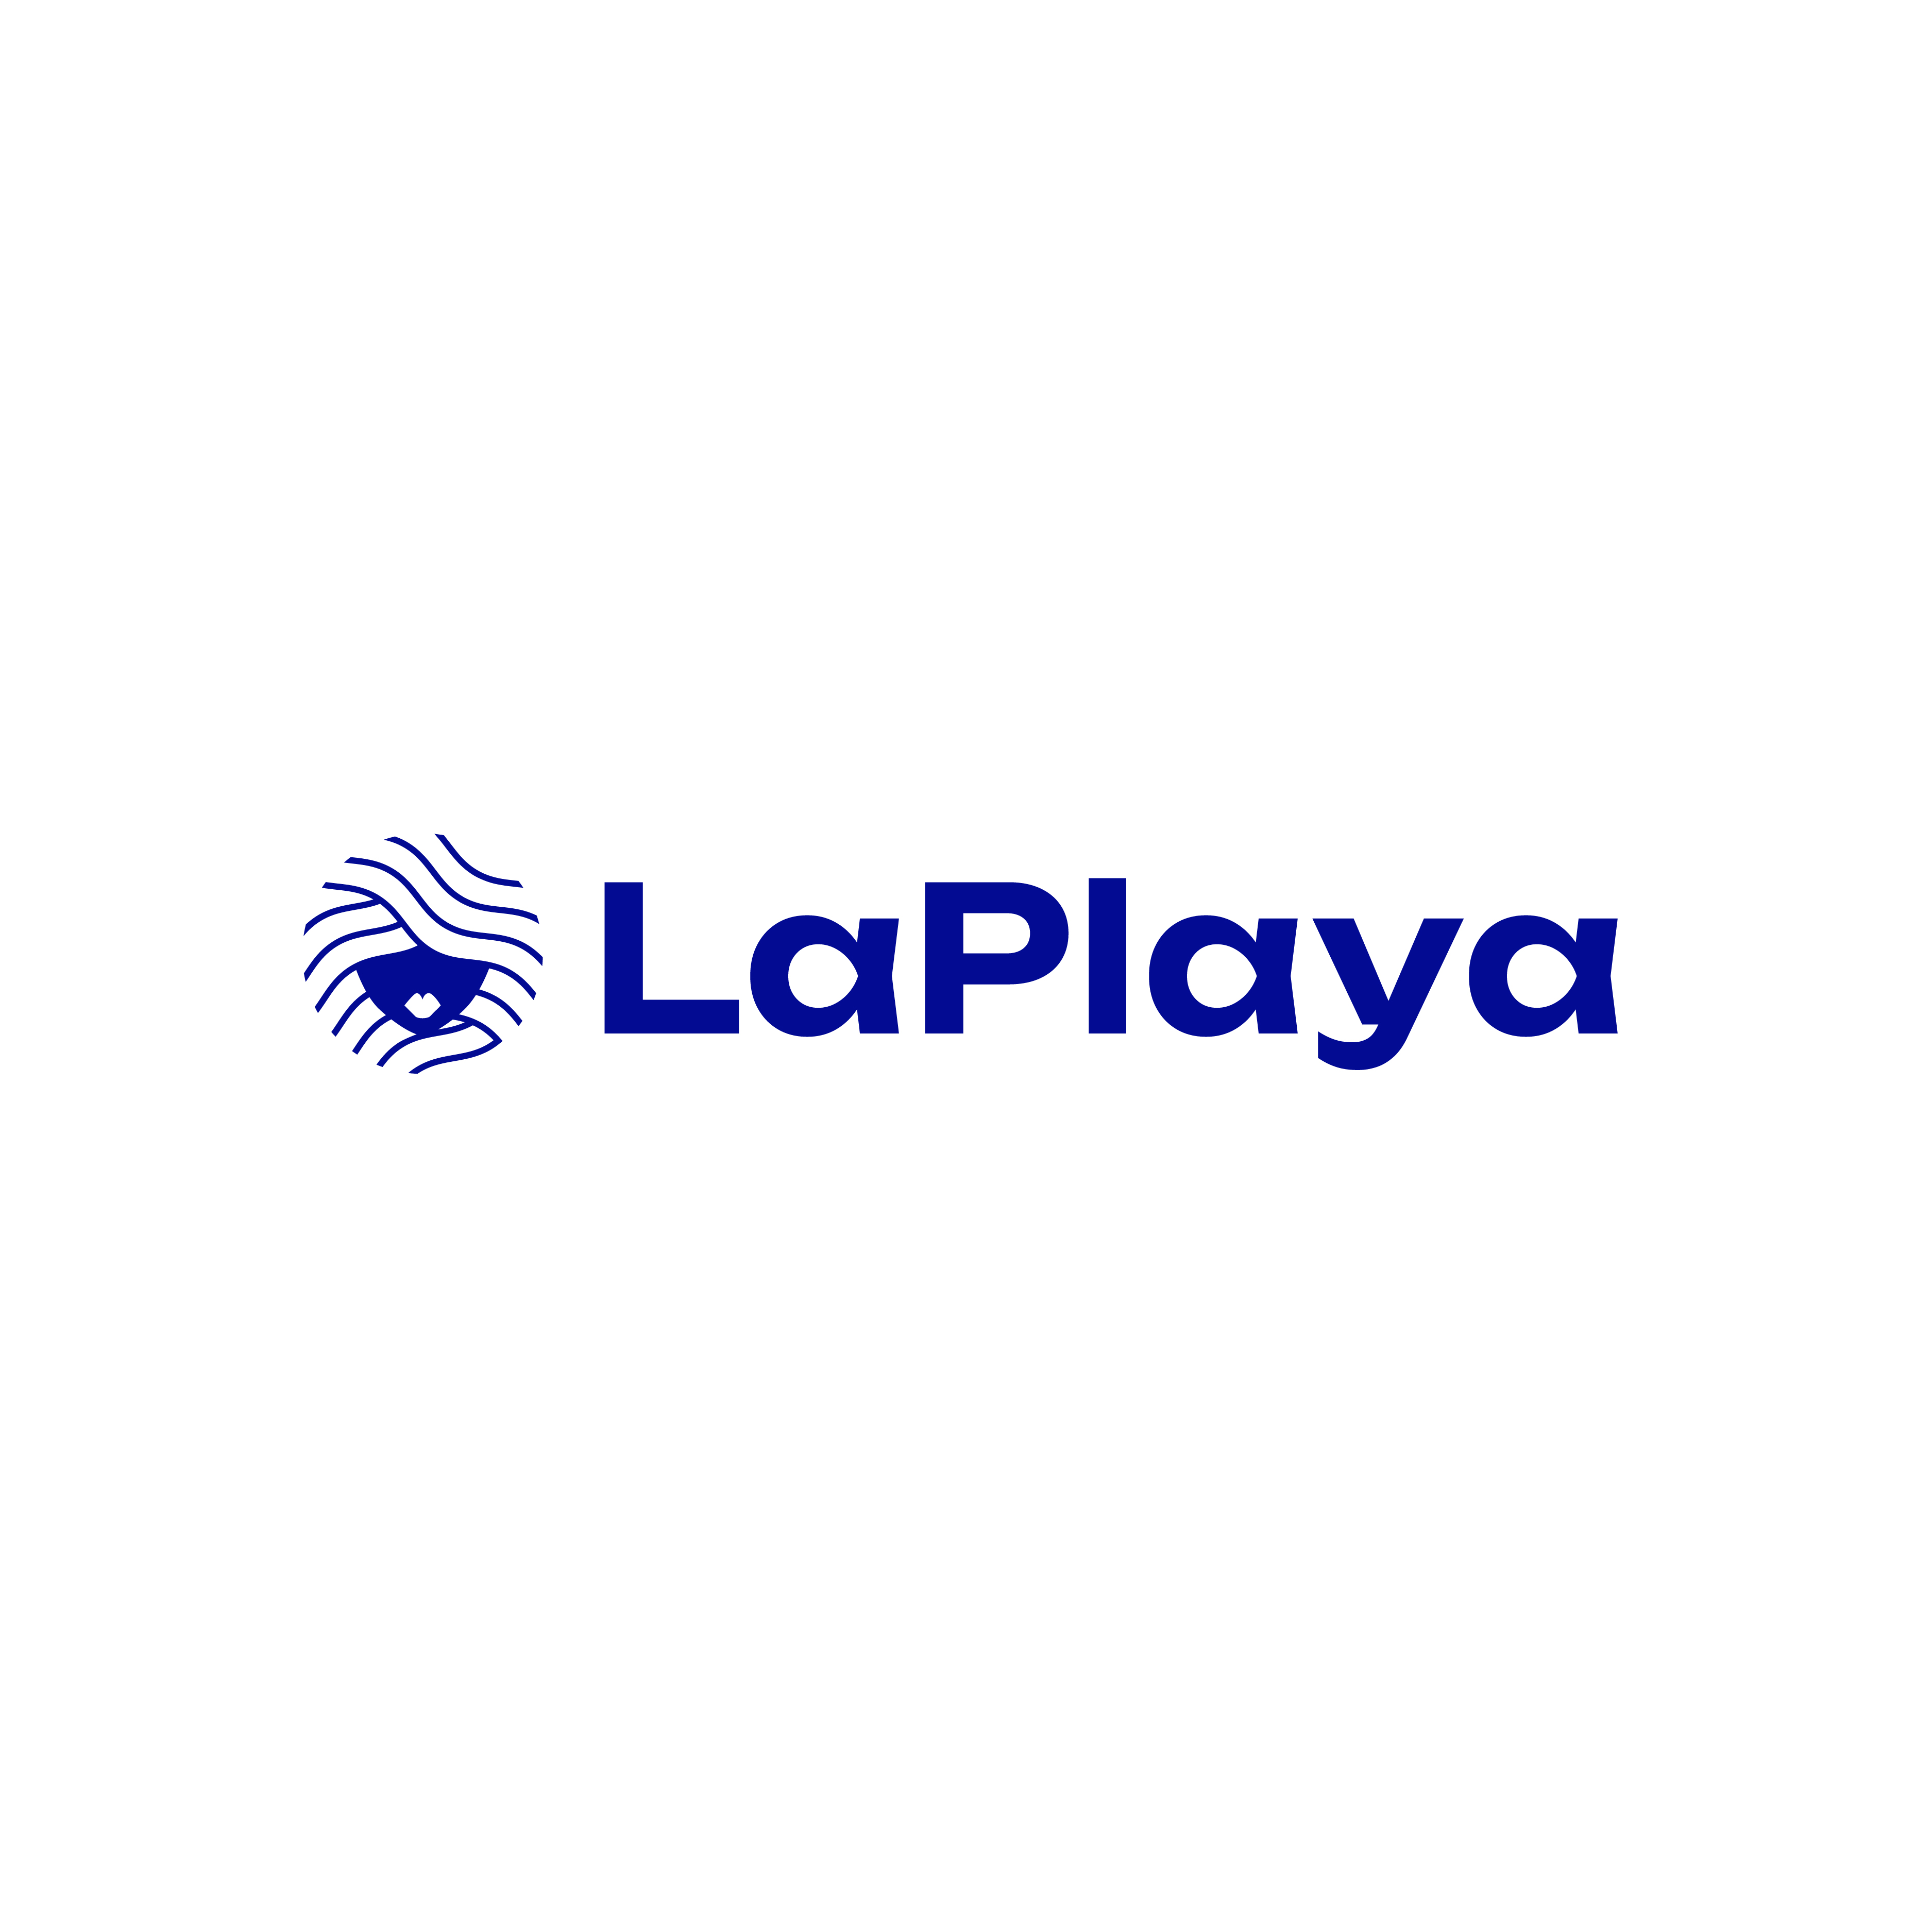 LaPlaya logo design by logo designer L.L. Peach for your inspiration and for the worlds largest logo competition